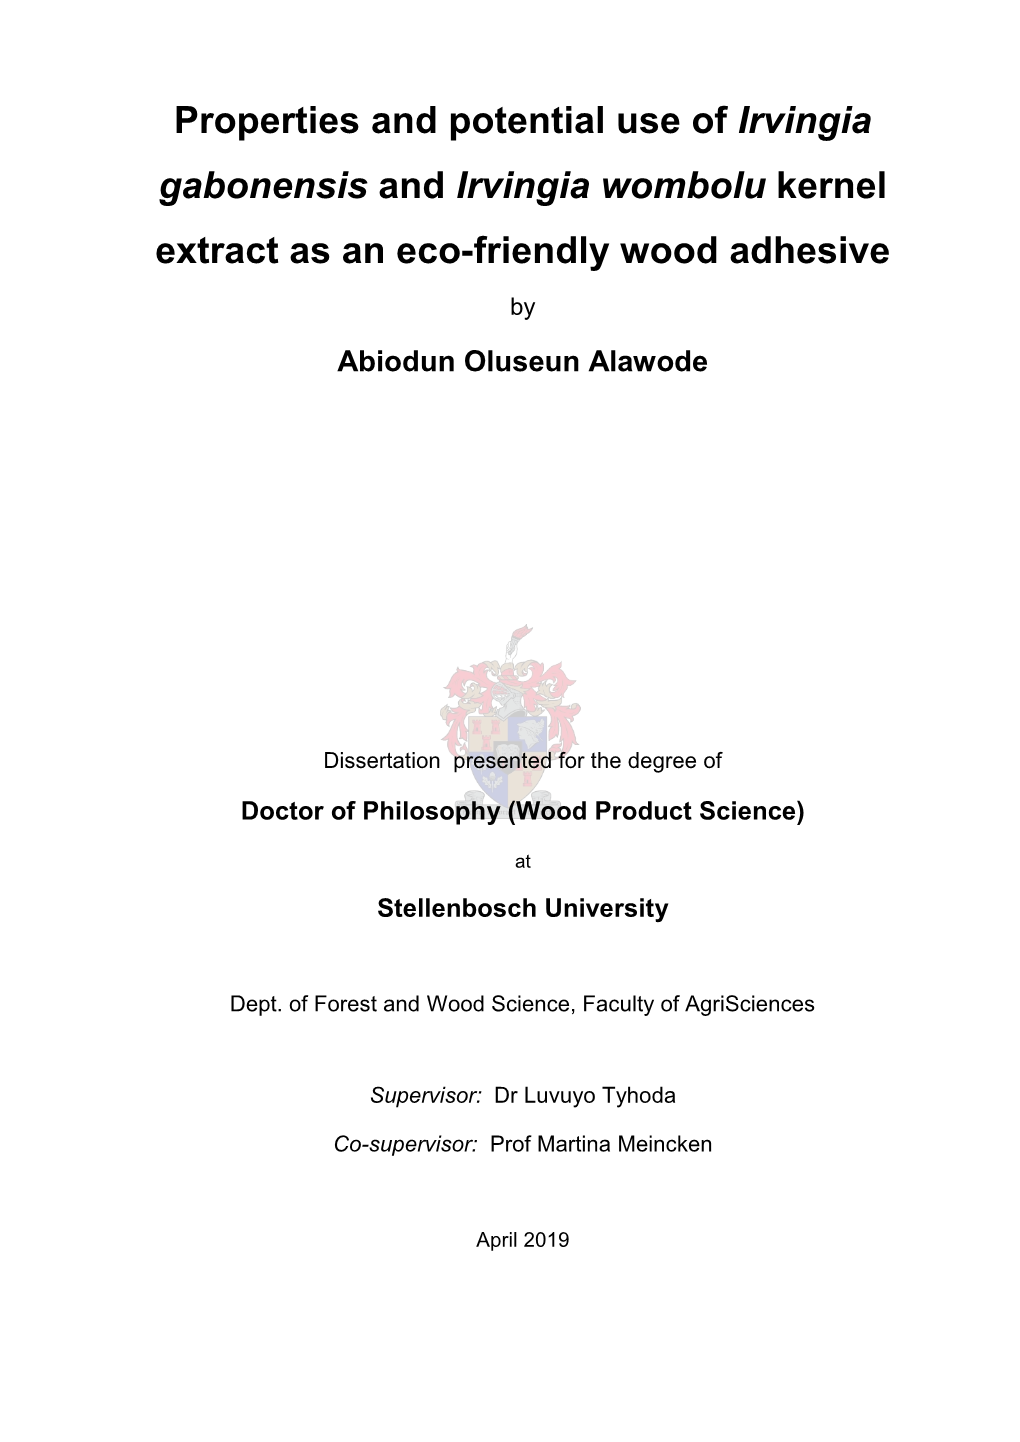 Properties and Potential Use of Irvingia Gabonensis and Irvingia Wombolu Kernel Extract As an Eco-Friendly Wood Adhesive By